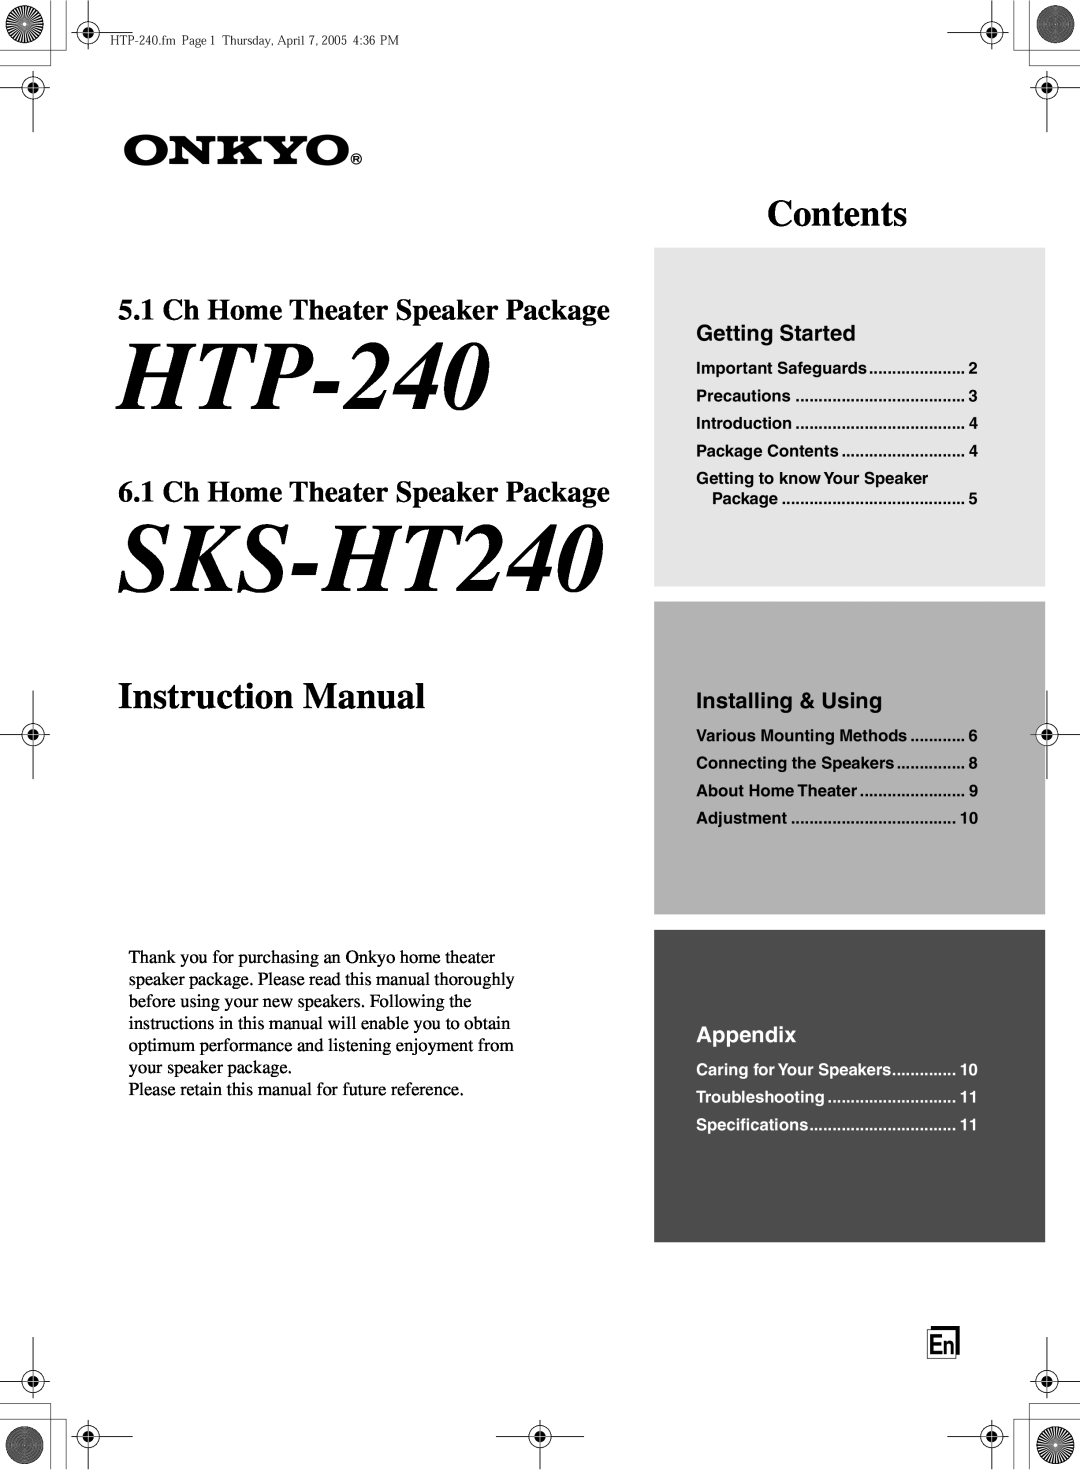 Onkyo HTP-240 instruction manual Getting Started, Installing & Using, SKS-HT240, Contents, Ch Home Theater Speaker Package 